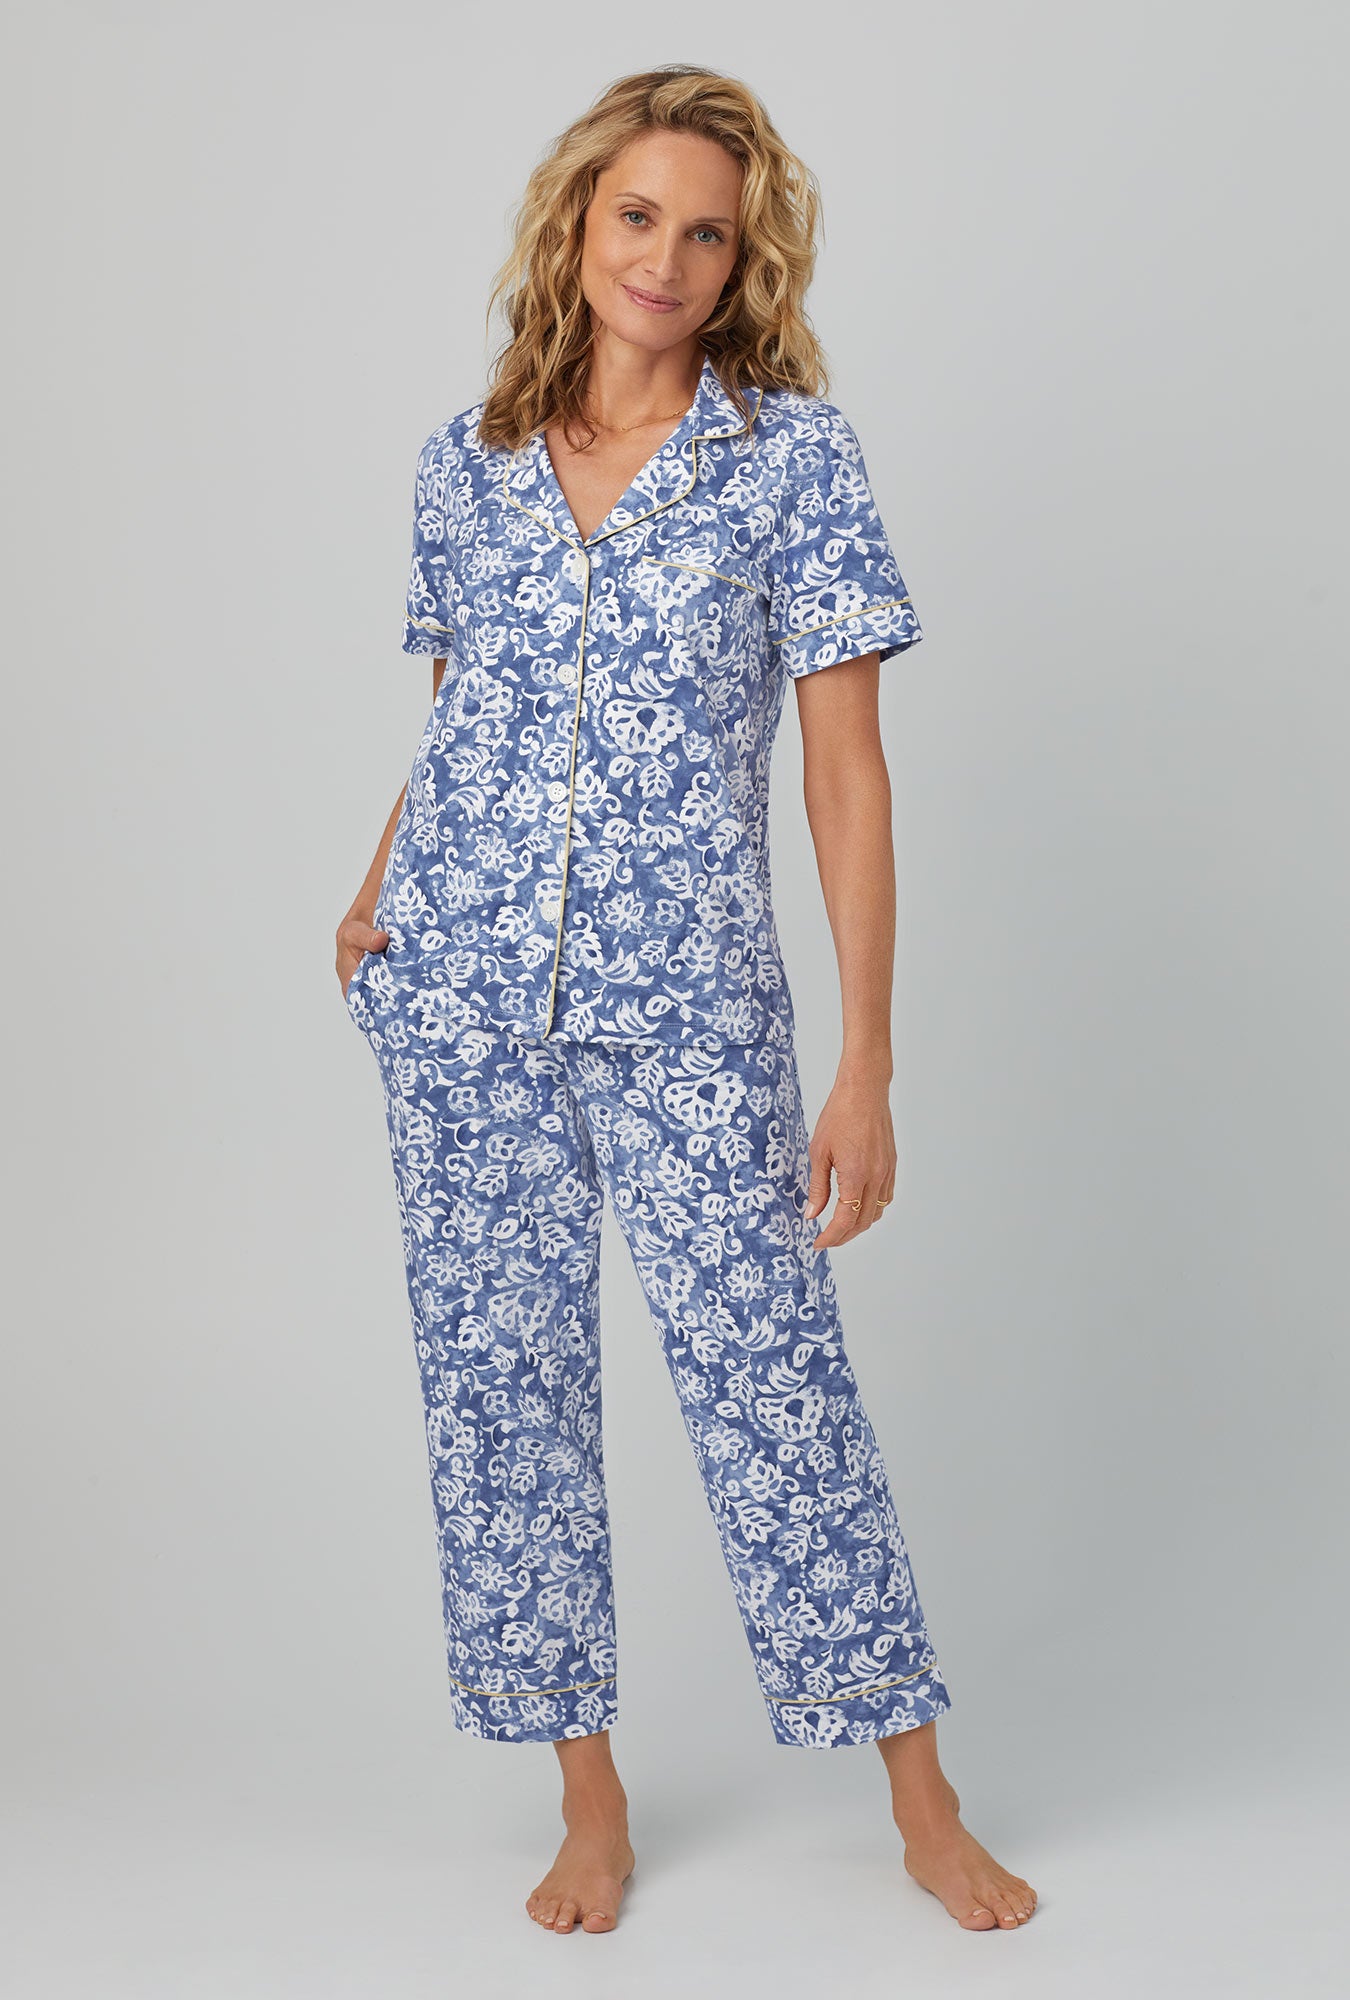 A lady wearing Short Sleeve Classic Stretch Jersey Cropped PJ Set with autumn eve print